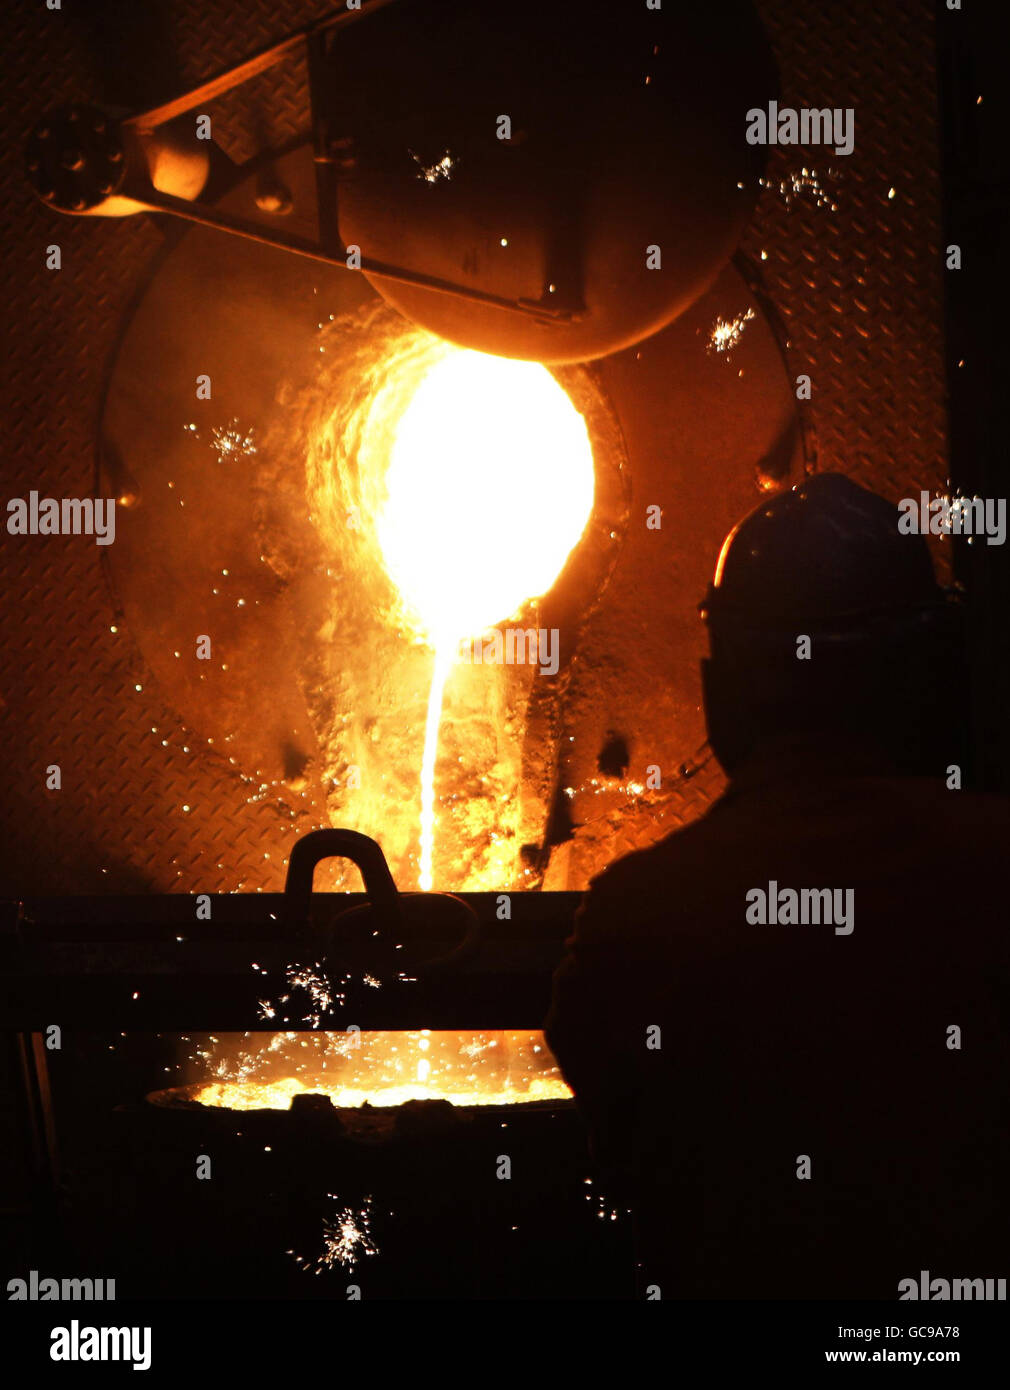 Photo essay to illustrate Scottish and British Industry. Employees at George Taylor & Co. (Hamilton) Ltd Founders and Engineers work at their Iron Foundry in Scotland. Stock Photo